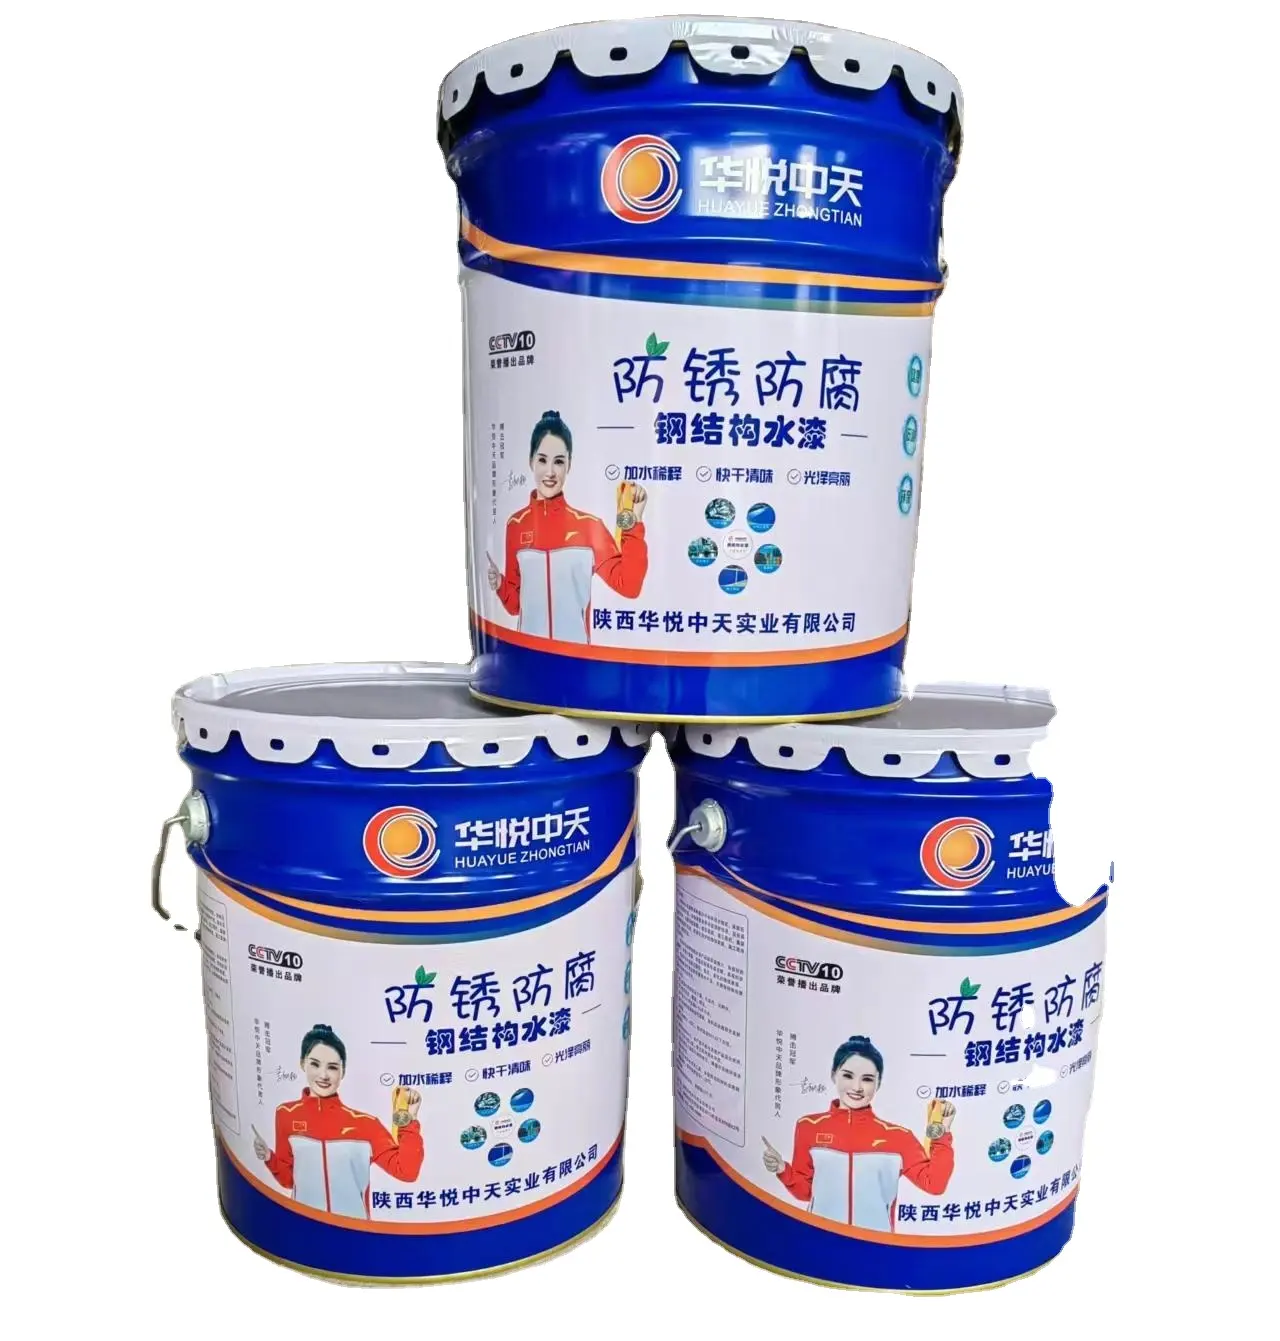 Customized Anti-corrosion Texture Liquid Coating Water Resistant Paint Spray For Steel Or Metal